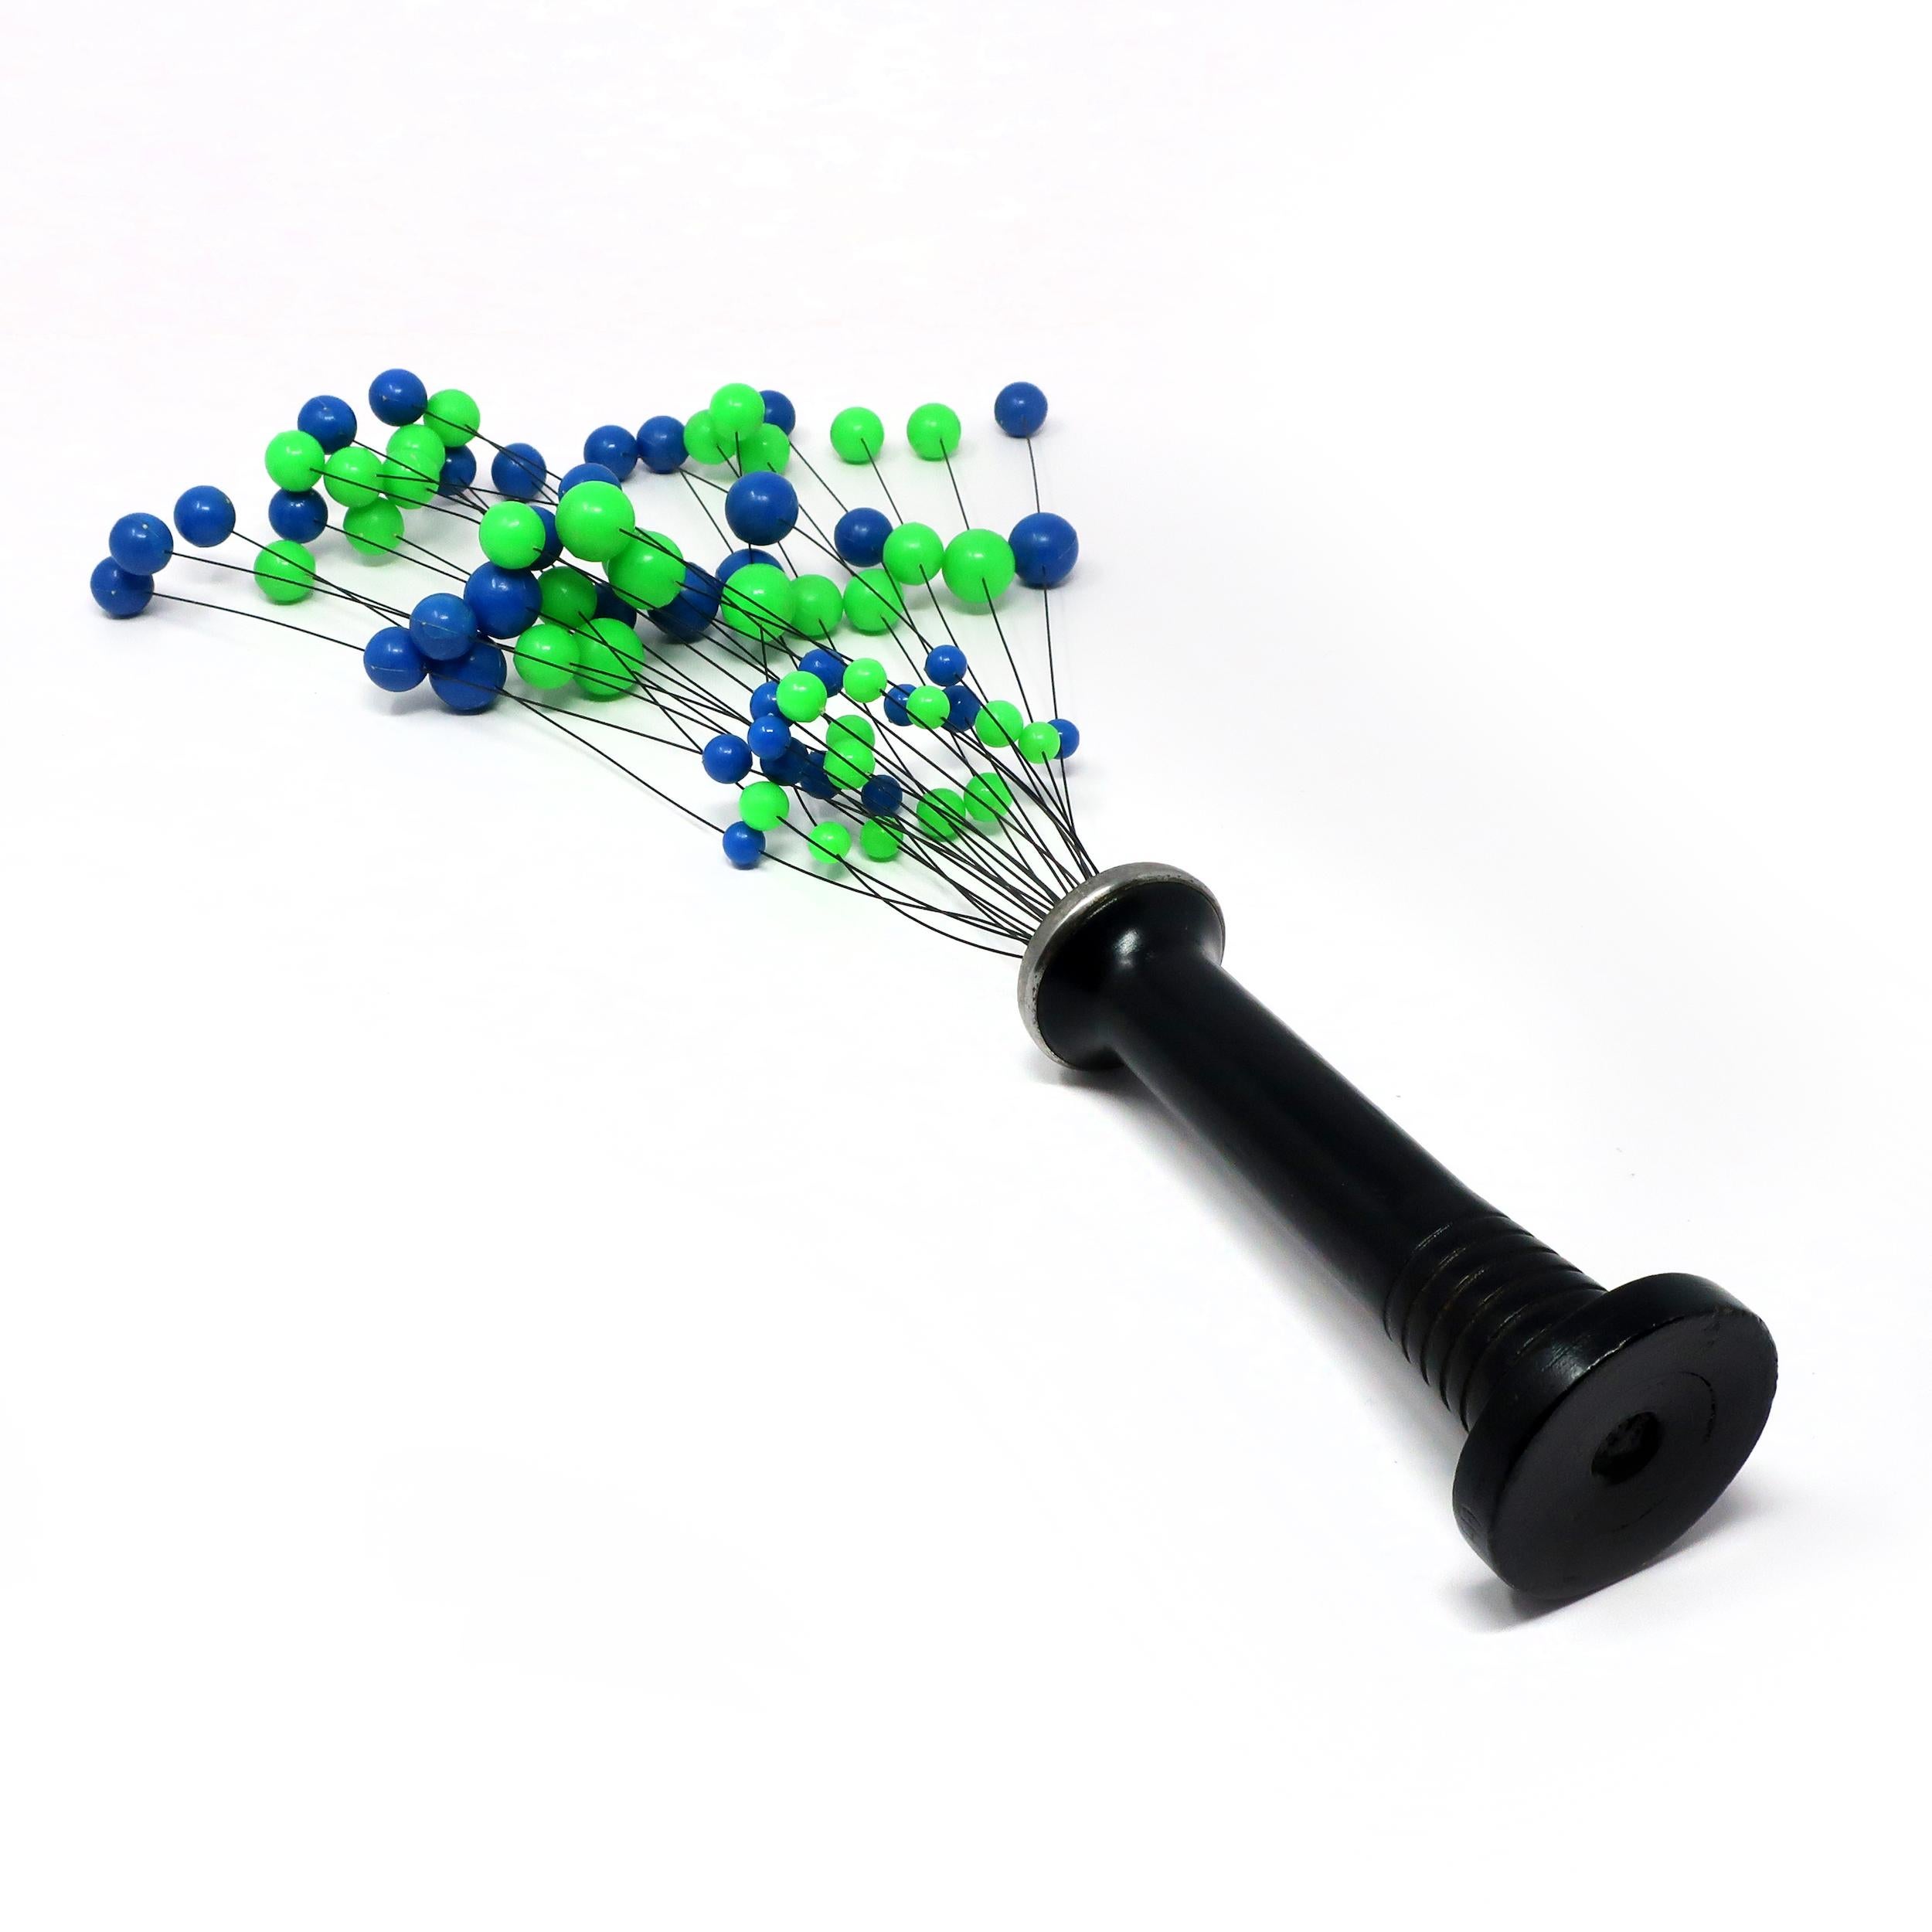 1960s Danish Modern Blue and Green Kinetic Ball Sculpture In Good Condition For Sale In Brooklyn, NY